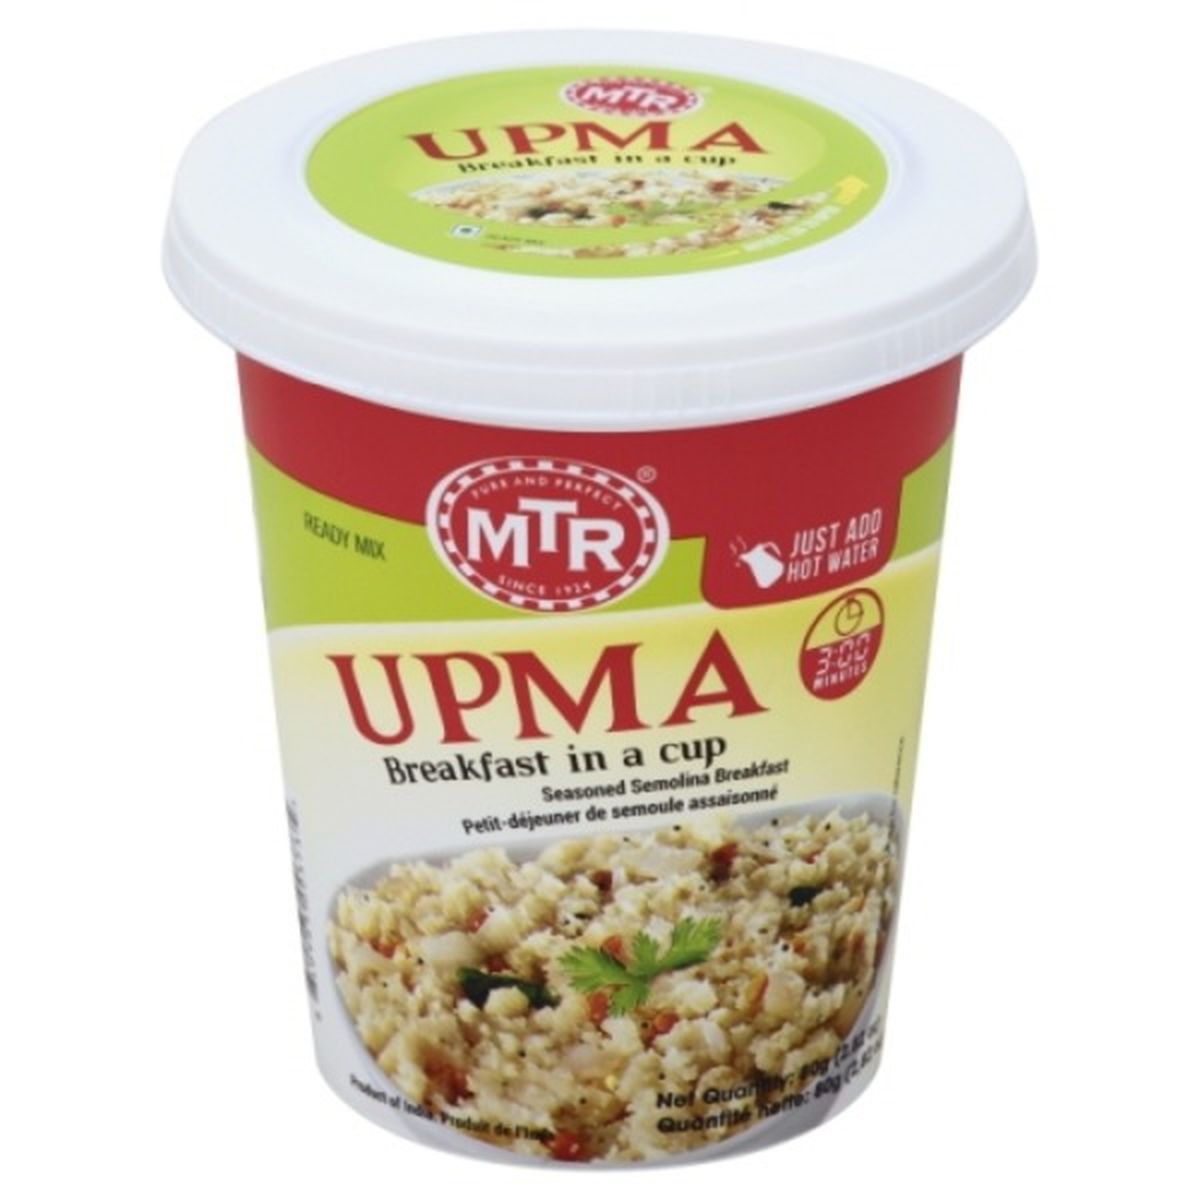 Calories in MTR Breakfast in a Cup, Upma